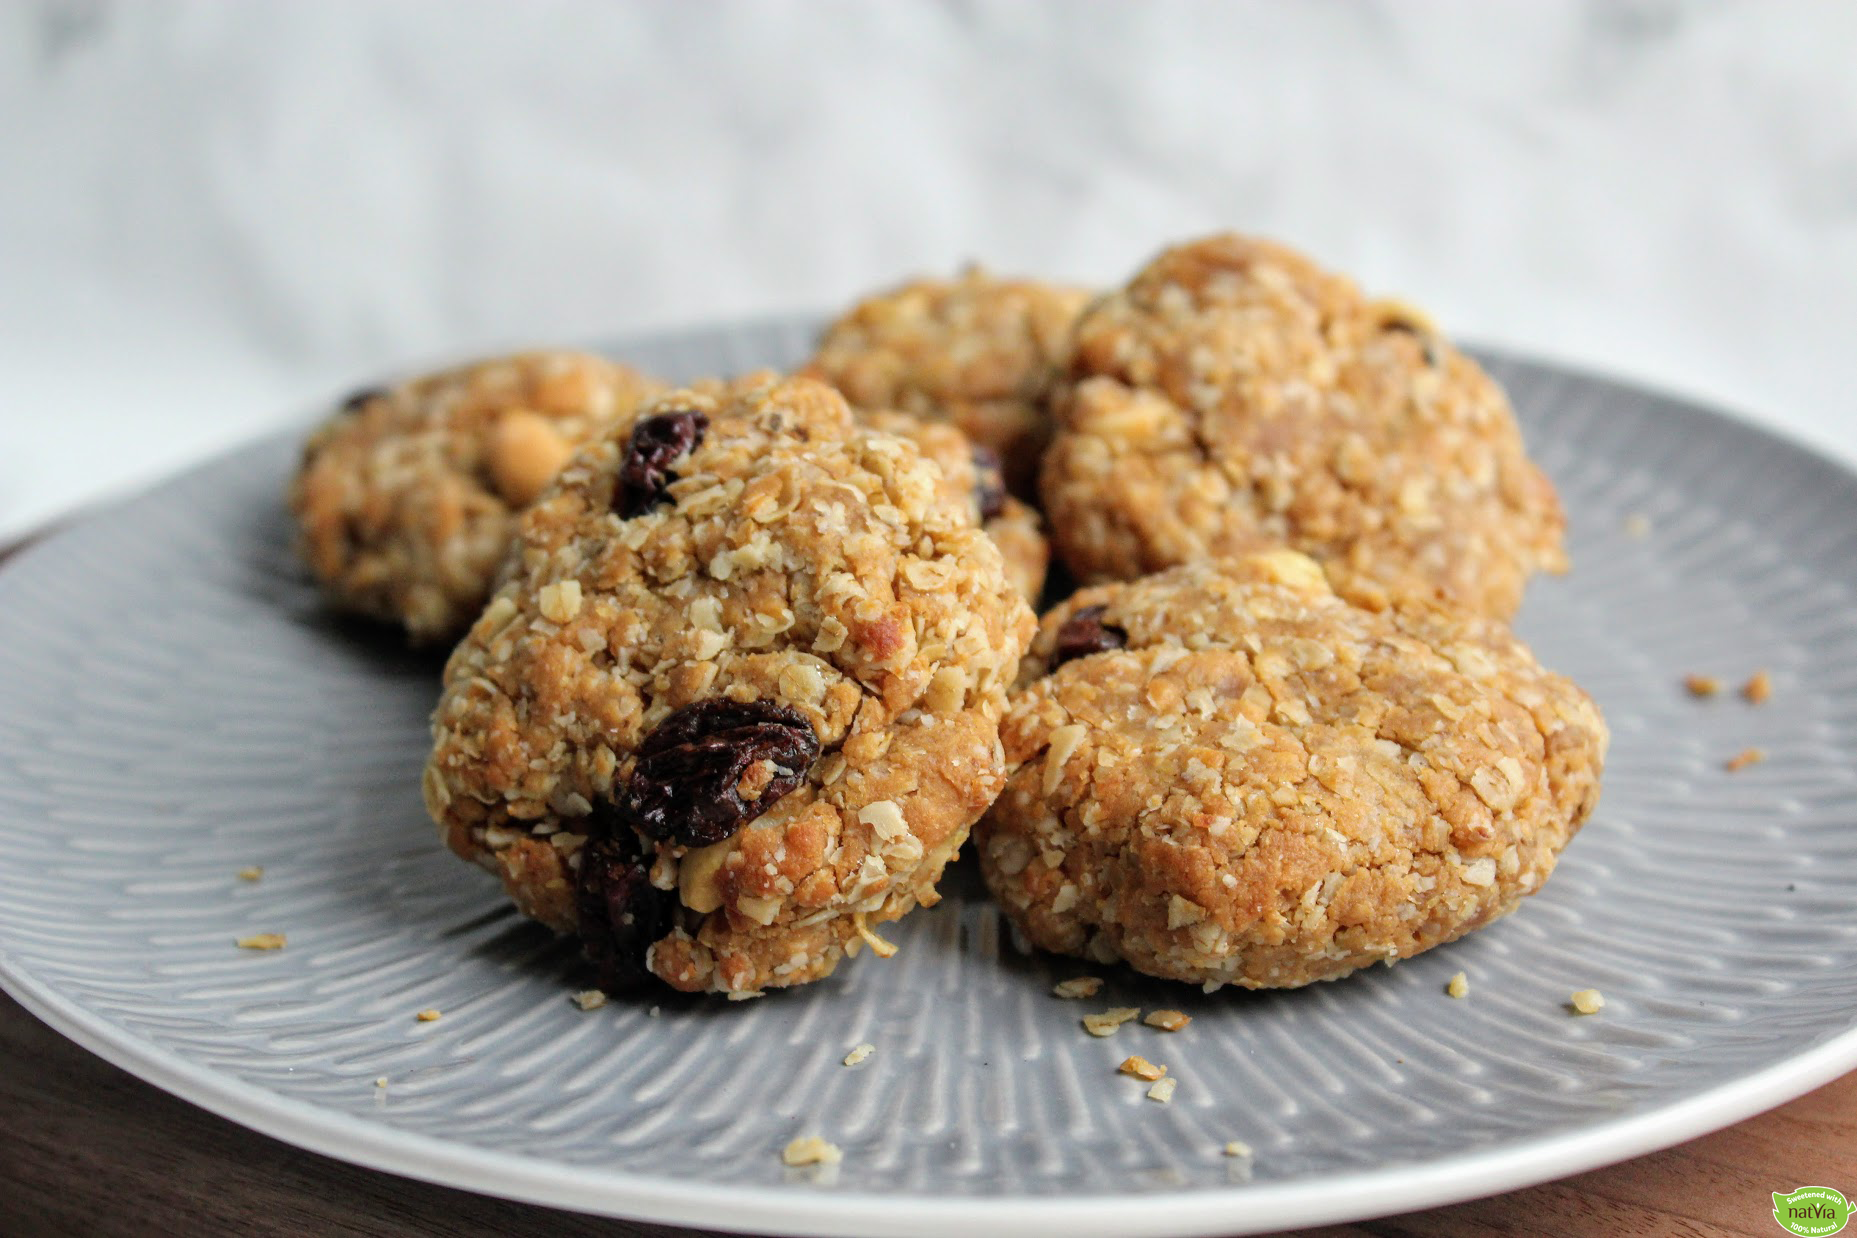 CRUMBLY RAISIN & PEANUT BUTTER COOKIES